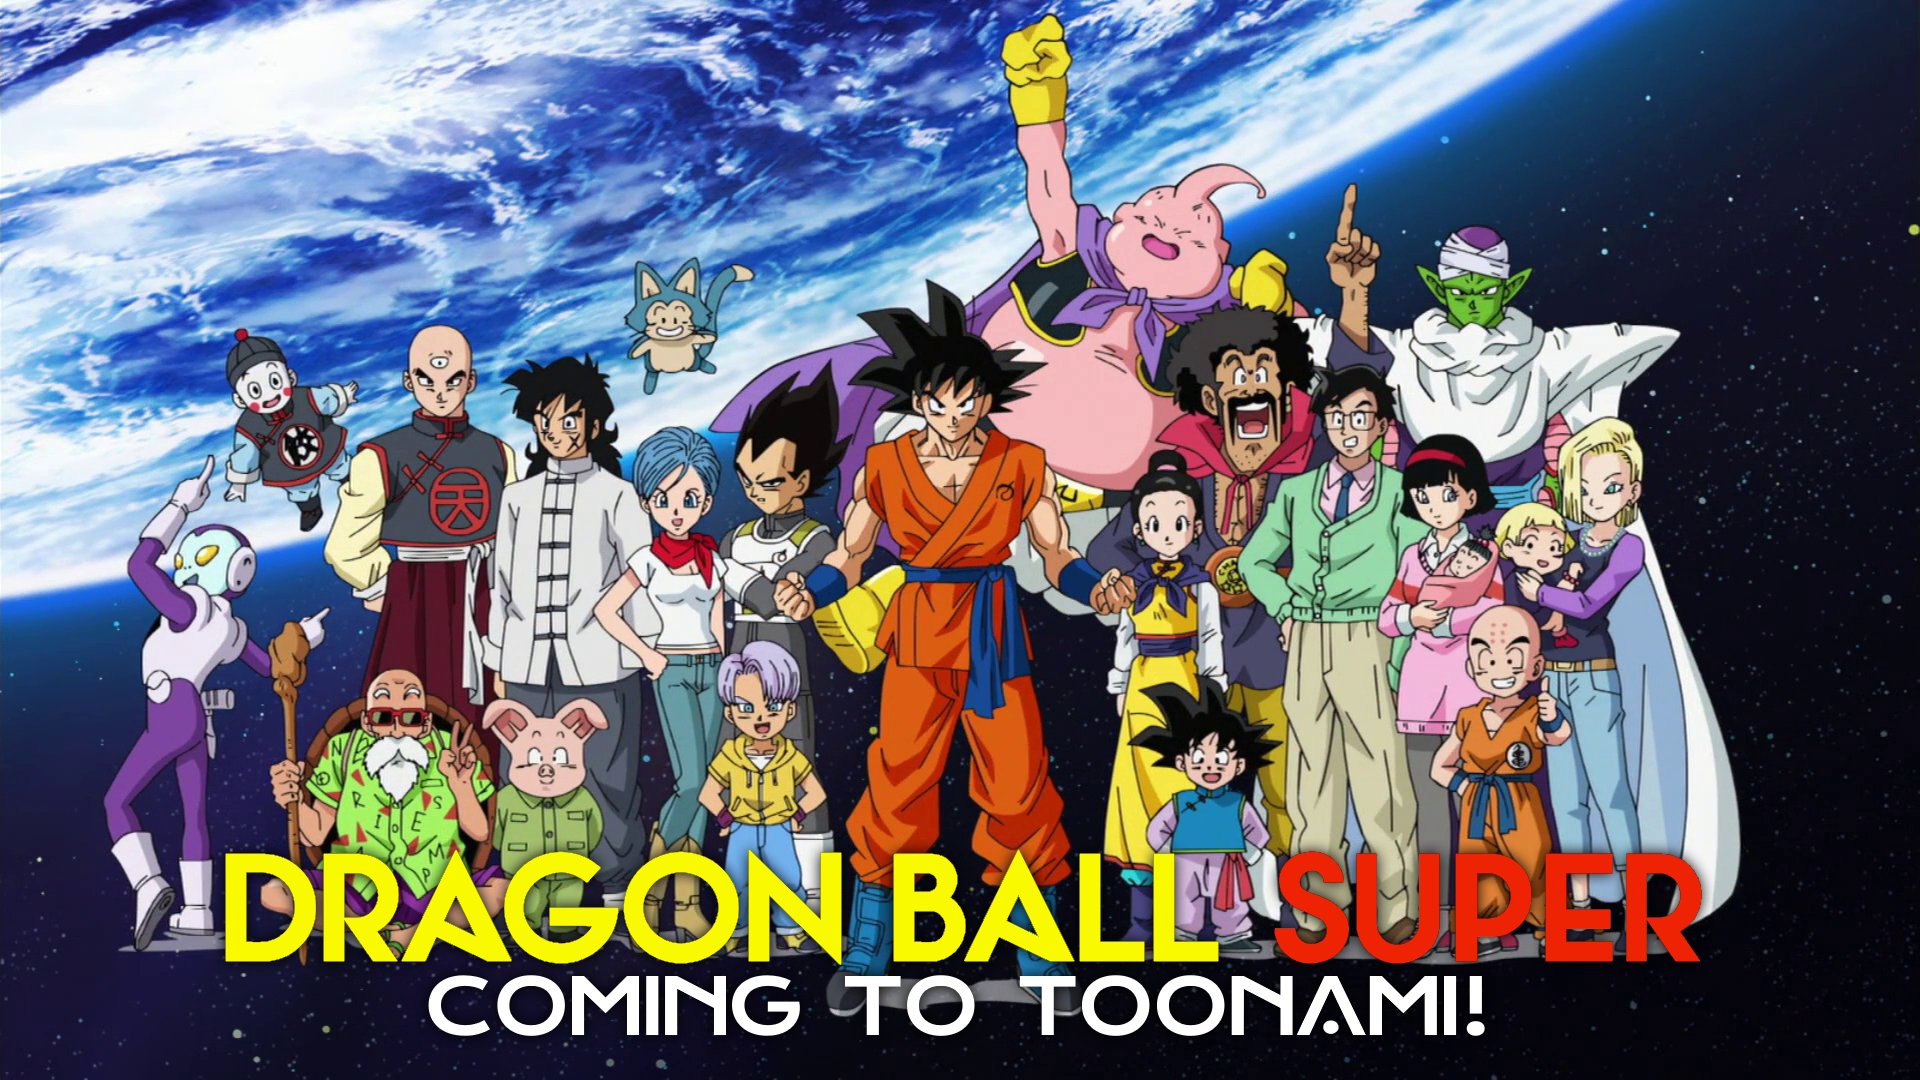 Dragon Ball Z Kai' to debut in 5 languages on Cartoon Network on April 16 -  MediaBrief